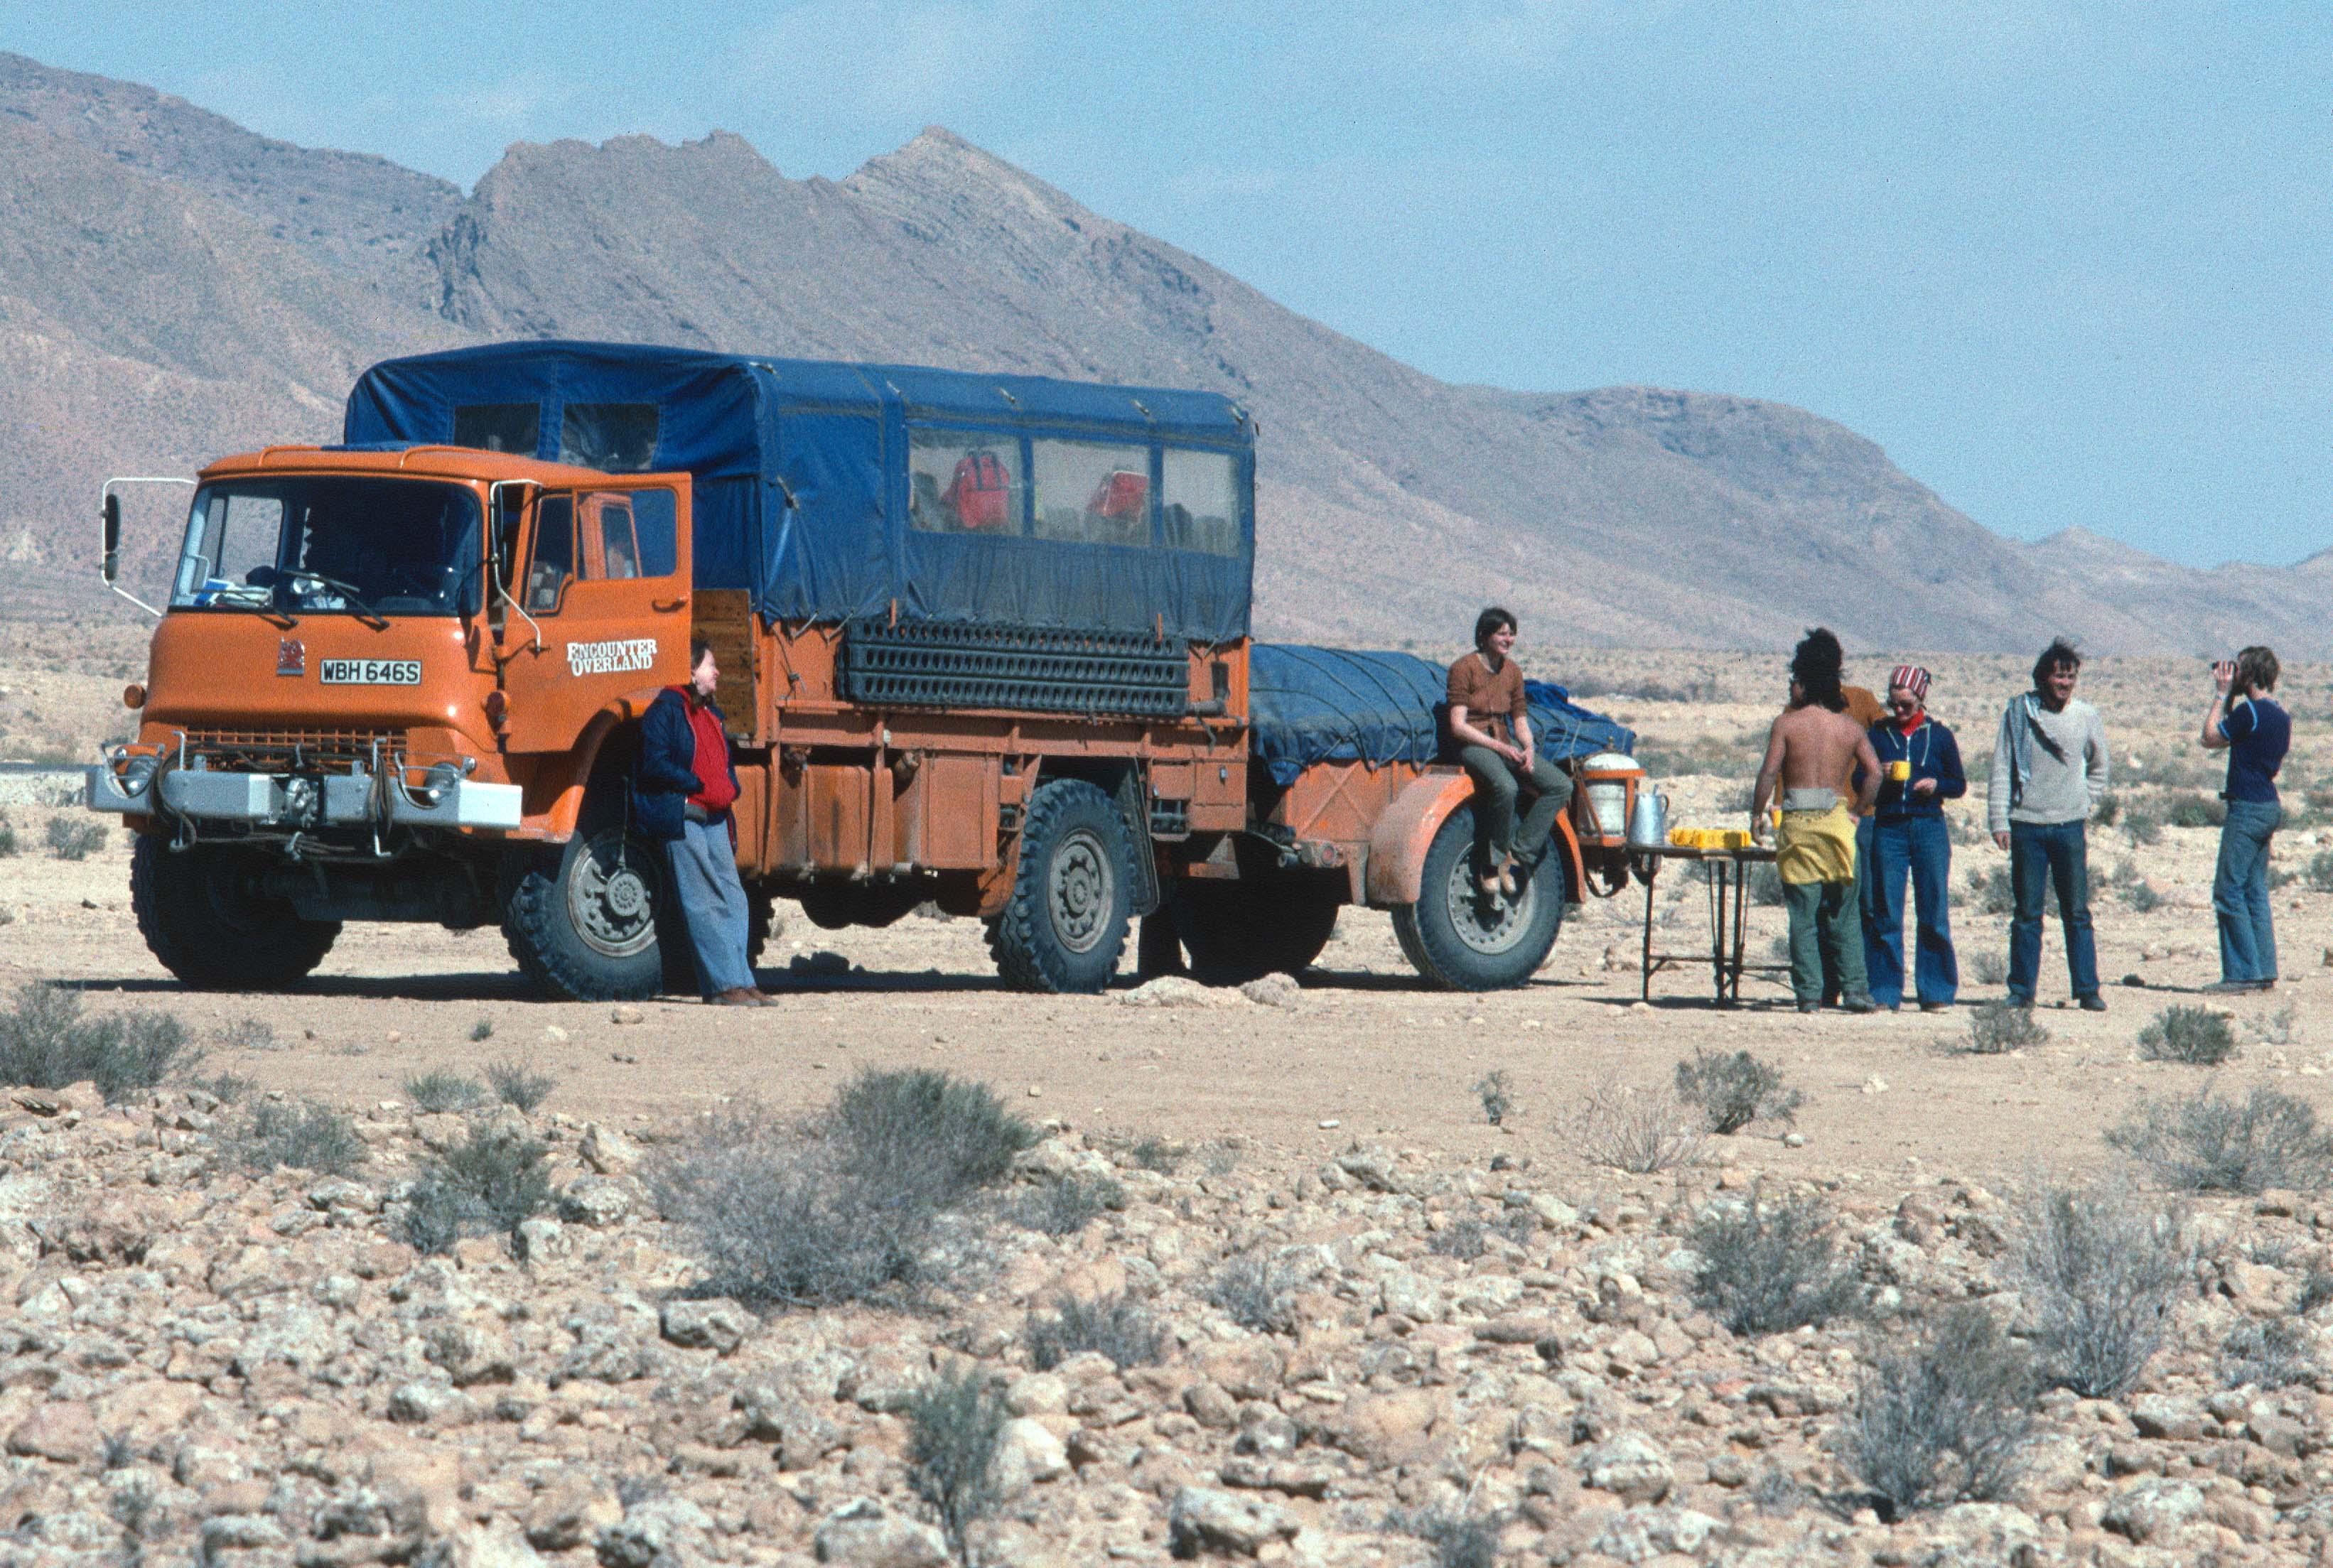 Encounter Overland truck in the Sahara with the EMs preparing for lunch